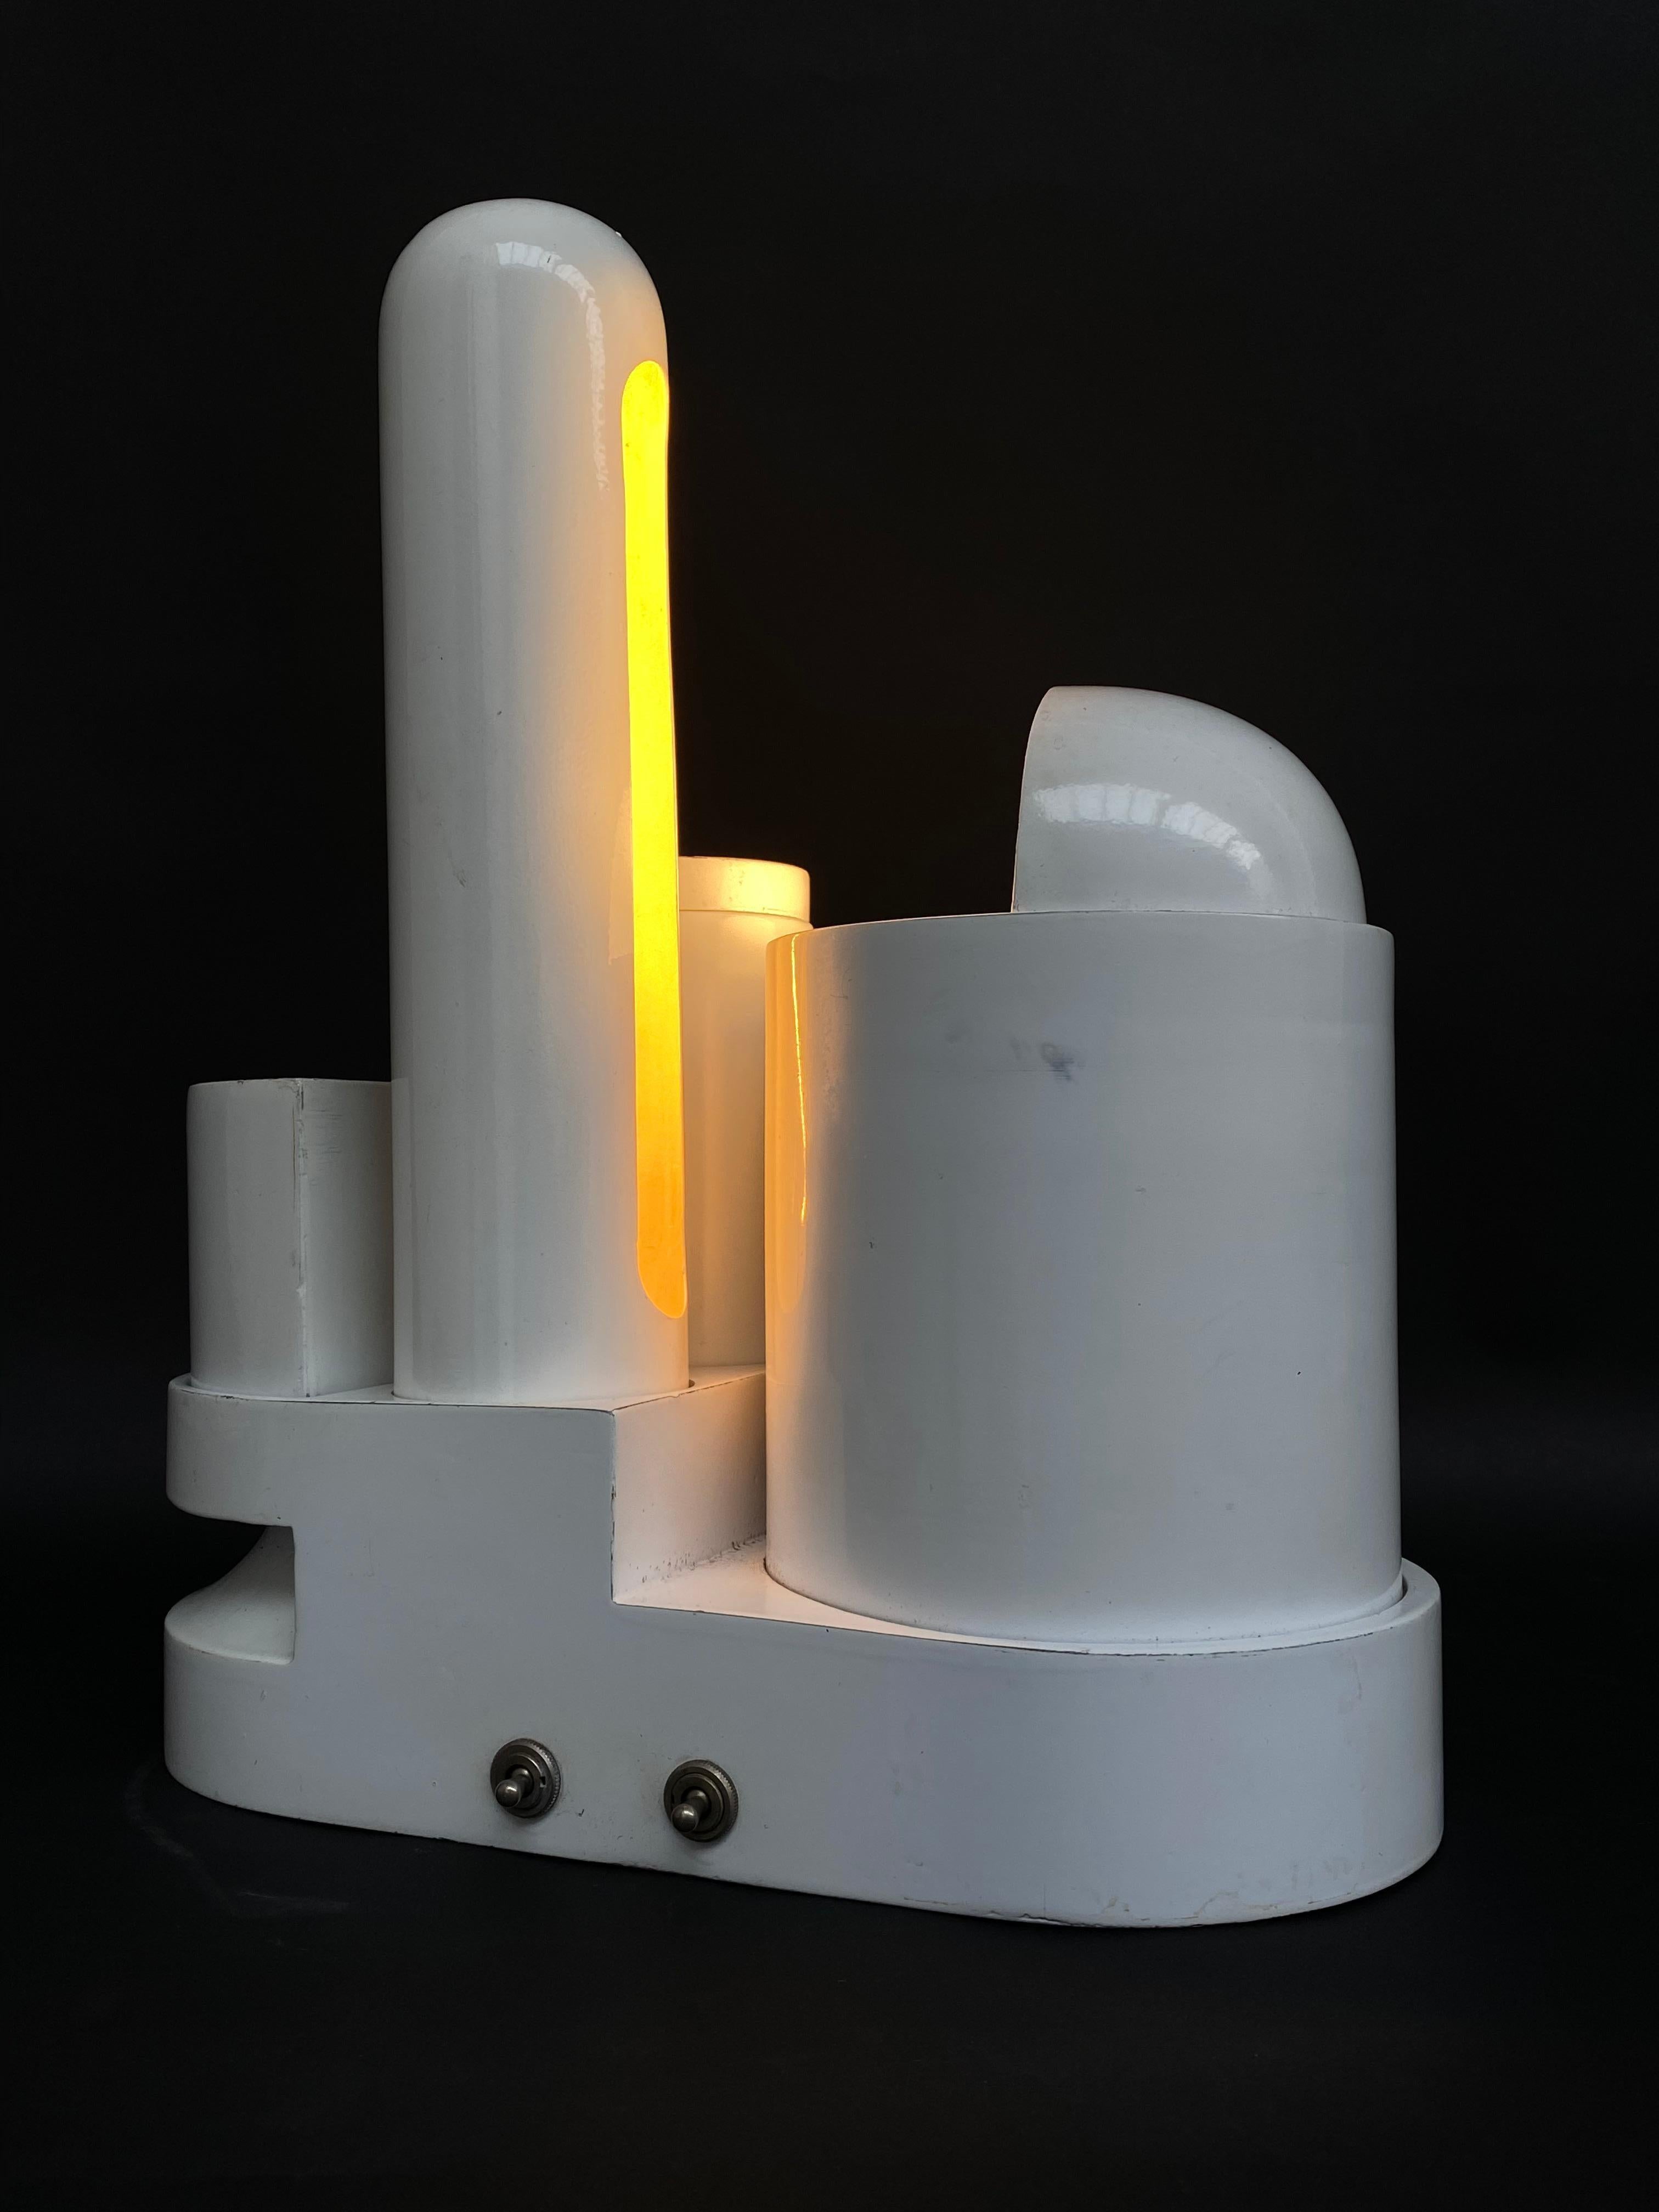 Wonderful and rare sculptural form 'Rimorchiatore' table lamp designed by Gae Aulenti for the Avant-garde lighting company 'Candle' ,Italy in 1967. This rare design forms part of the permanent design collection at the 'Cooper Hewitt Smithsonian'